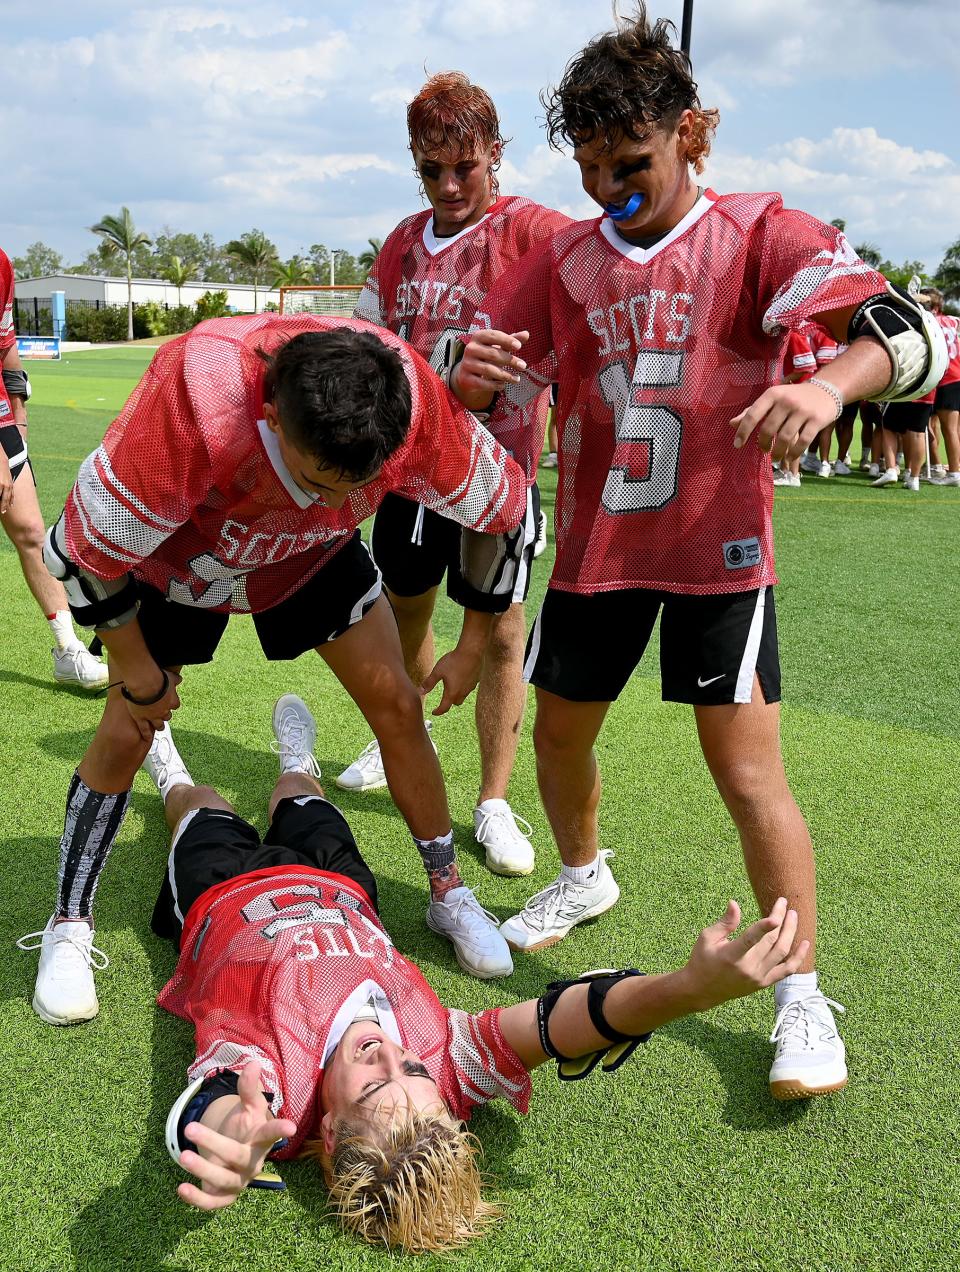 St. Andrew’s Connor Hofbauer (45) celebrates surrounded by his teammates Friday after winning their game against the Bolles School in a boys 1A lacrosse state championship matchup in Naples,.